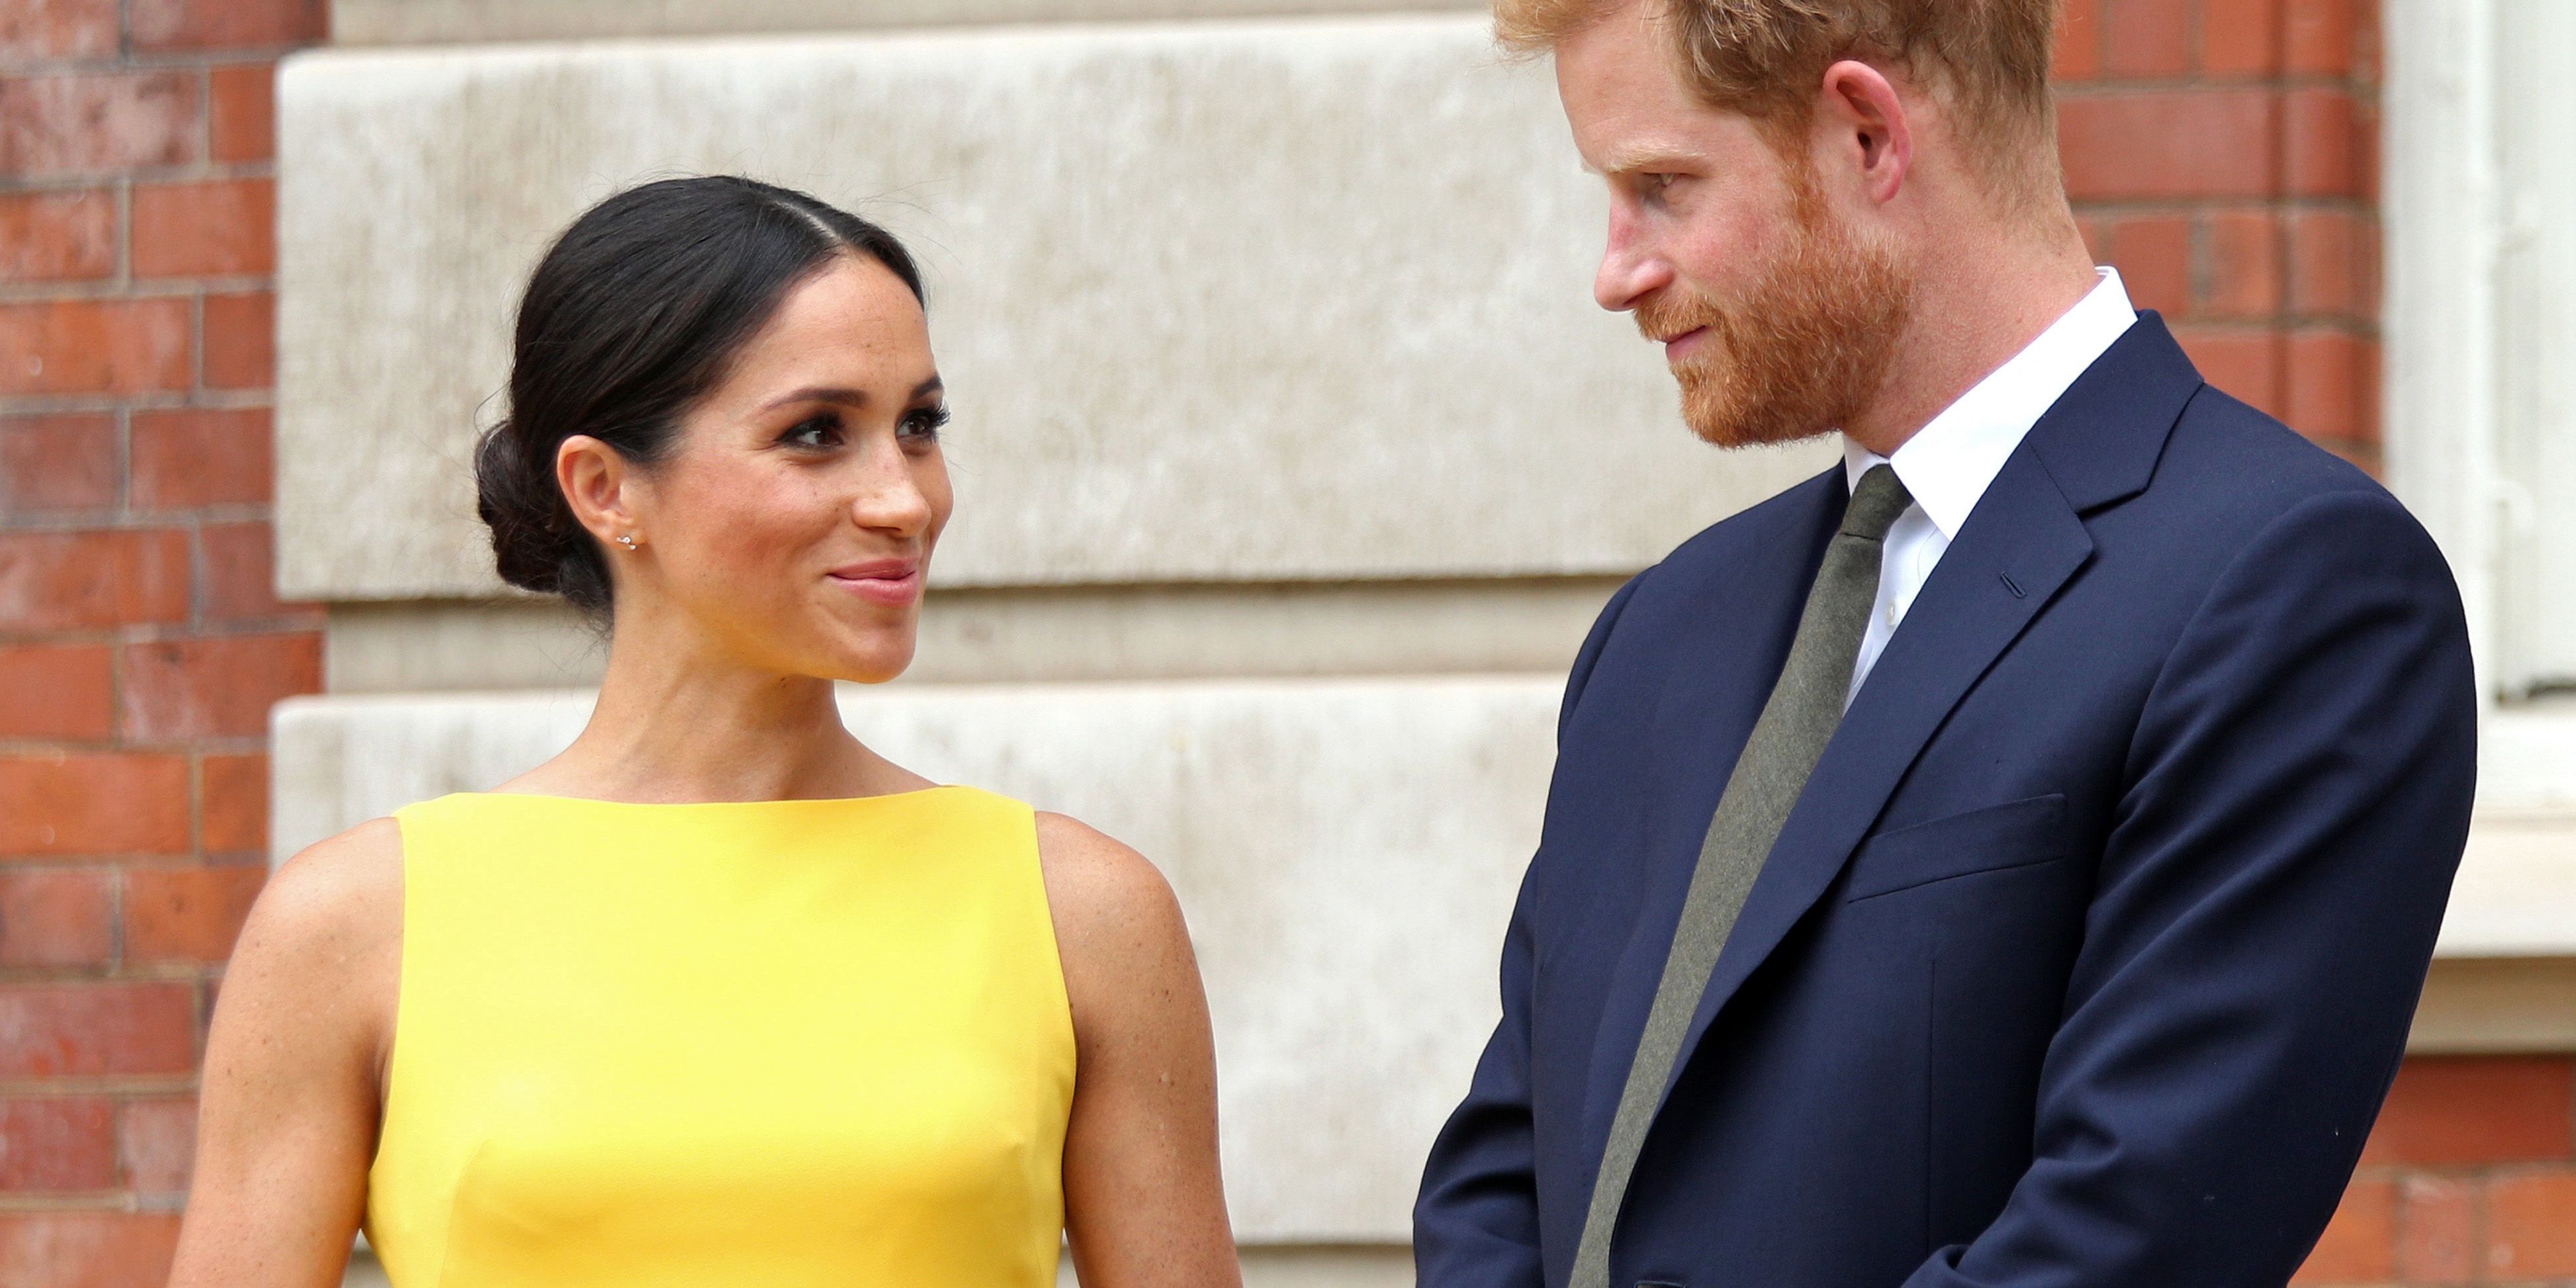 Meghan Markle - Duchess of Sussex wearsBrandon Maxwell To